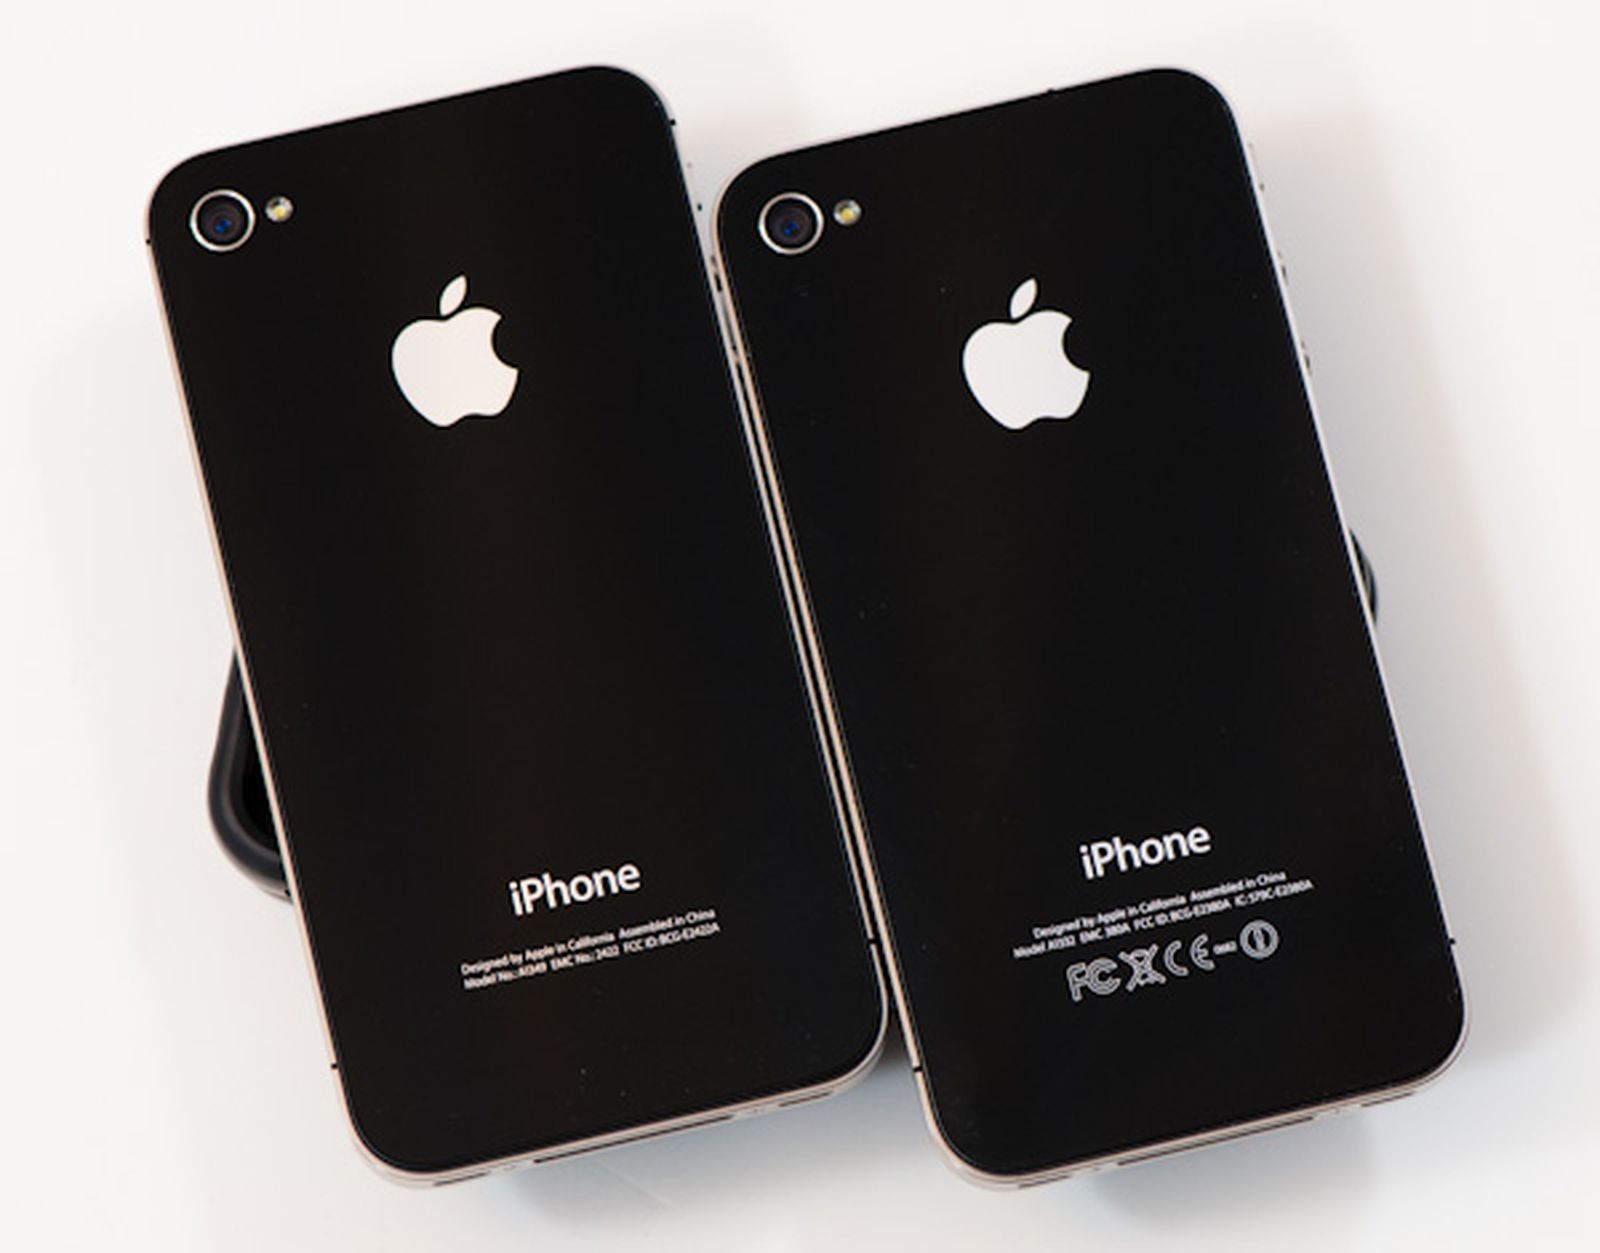 Apple May No Longer Be Required To Etch Fcc Labels On Iphone Macrumors